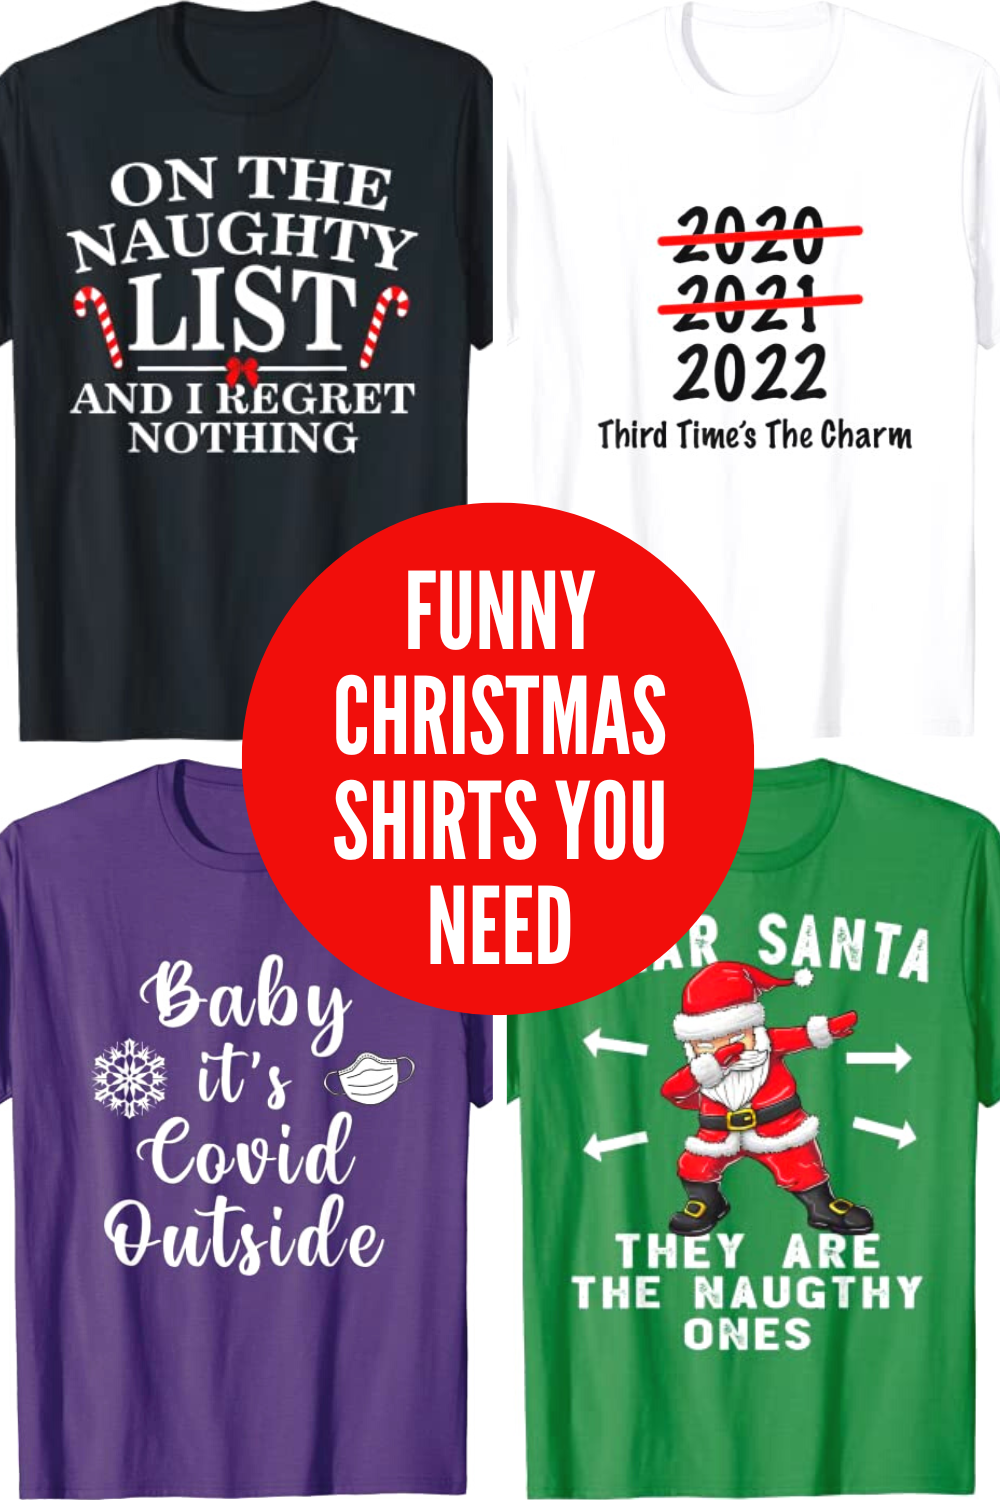 10 Funny Christmas Shirts You Need in 2023